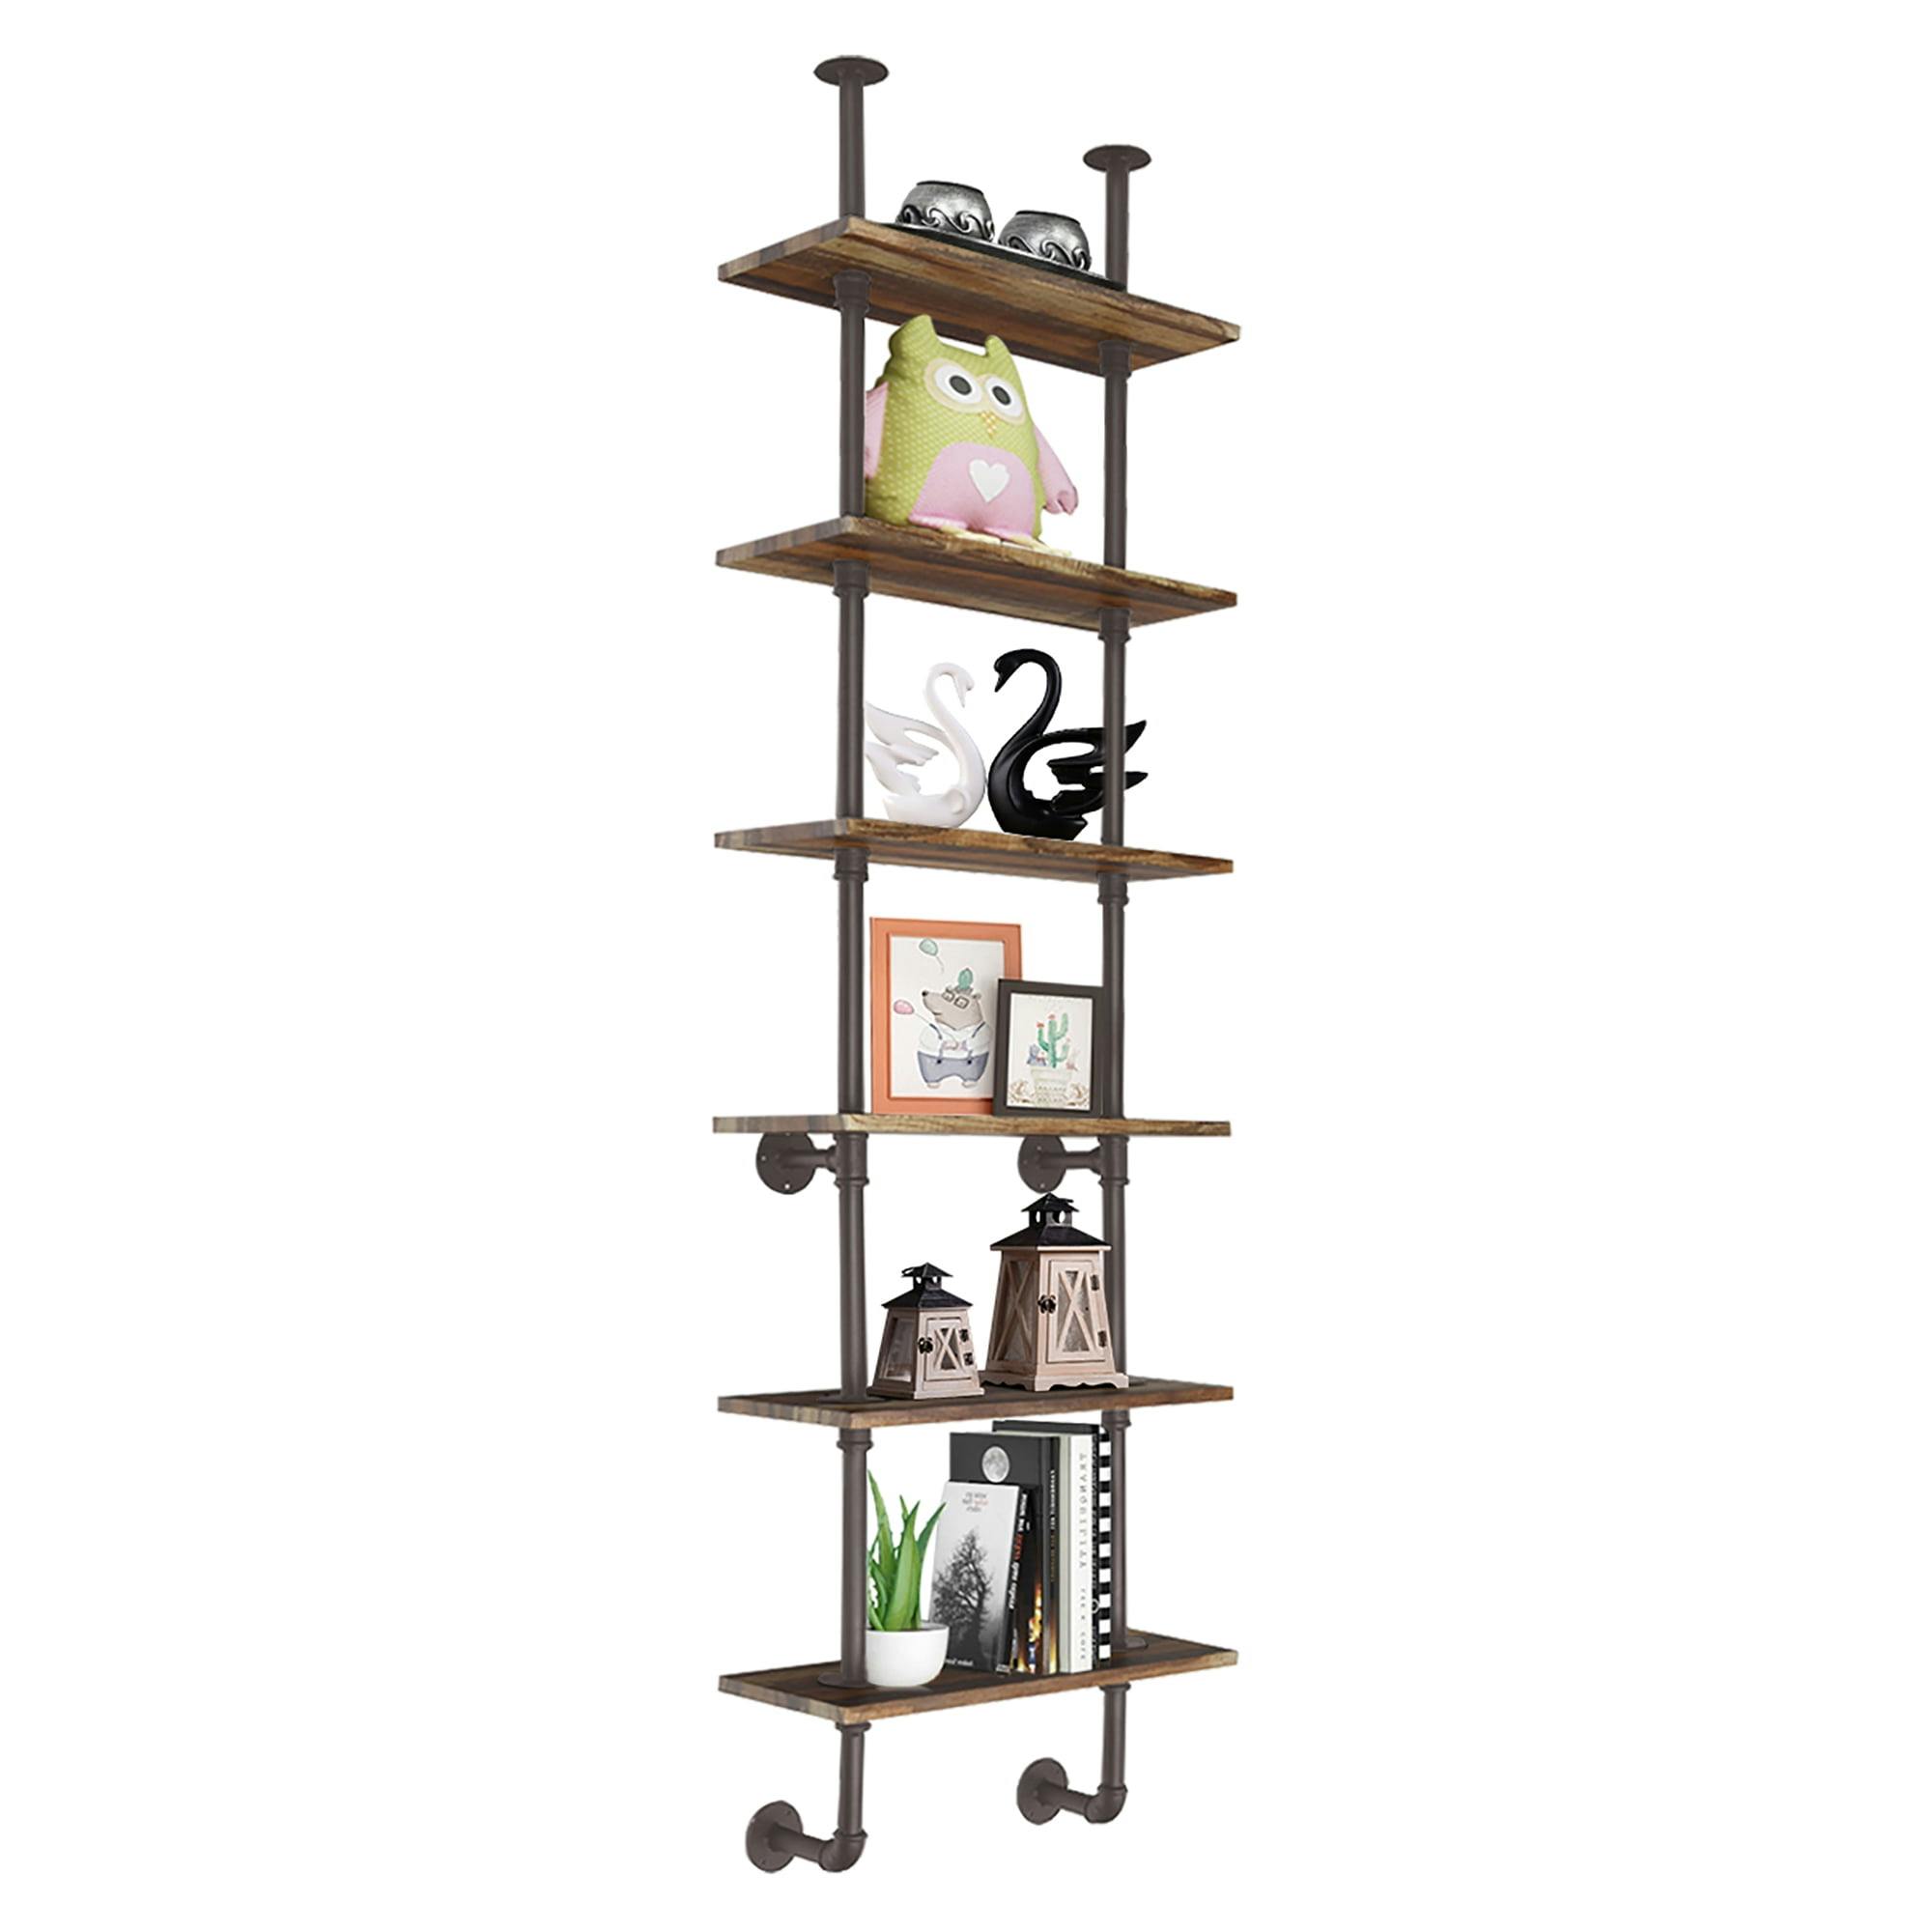 Vintage Industrial Wall-Mounted Pipe Shelving Unit, Rustic Brown